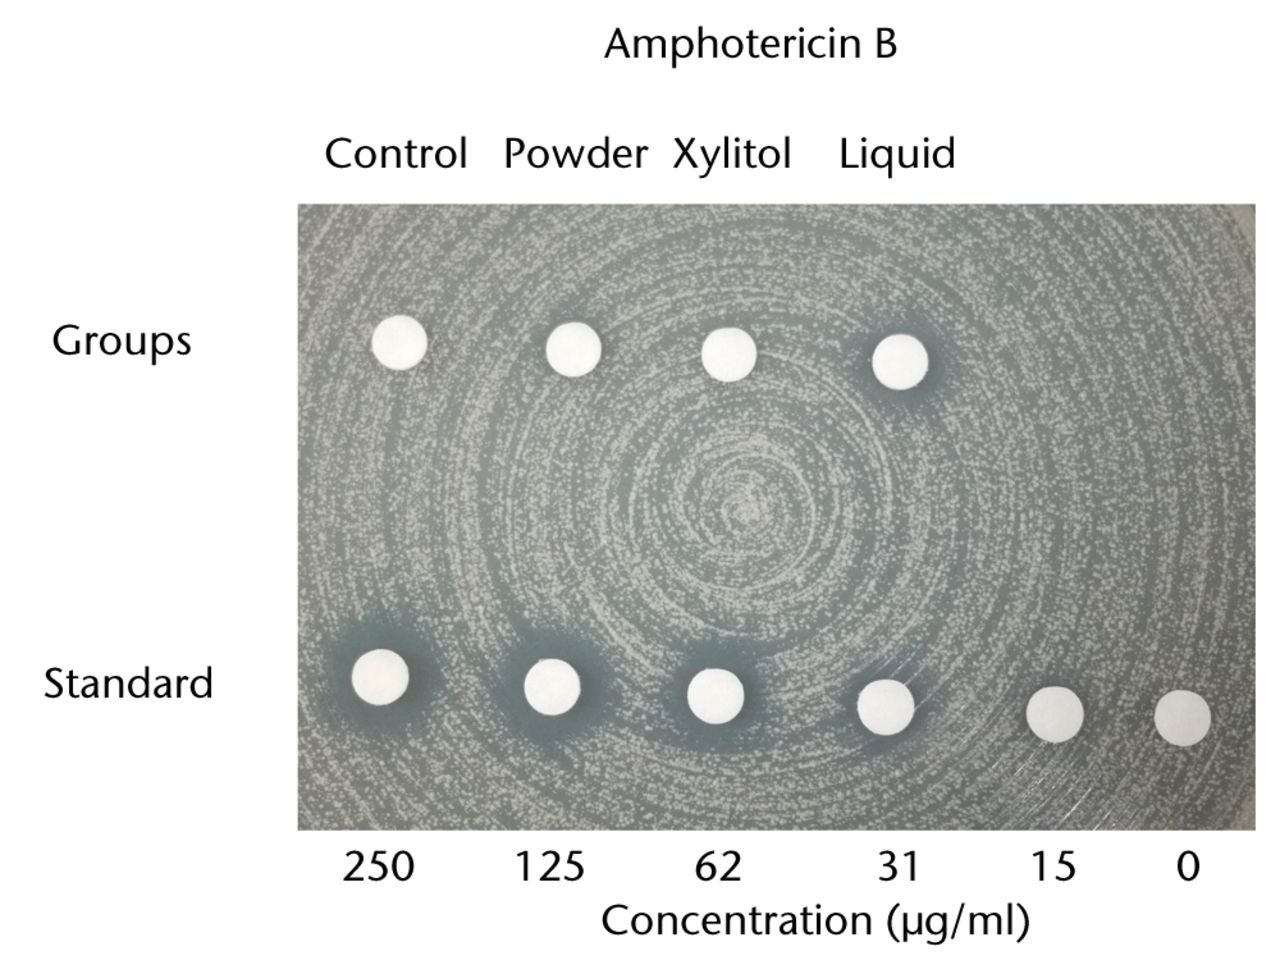 Figs. 3a - 3b 
          Charts showing antibacterial activity
of eluate samples from bone cement with different preparations,
as determined by agar-disk diffusion bioassay. The data are presented
in terms of inhibition of the test organisms: figure 1a - methicillin-resistant Staphylococcus
aureus and b) Candida albicans. The growth
was visually compared with standard samples containing different
concentrations of a) vancomycin and b) amphotericin B. 
        